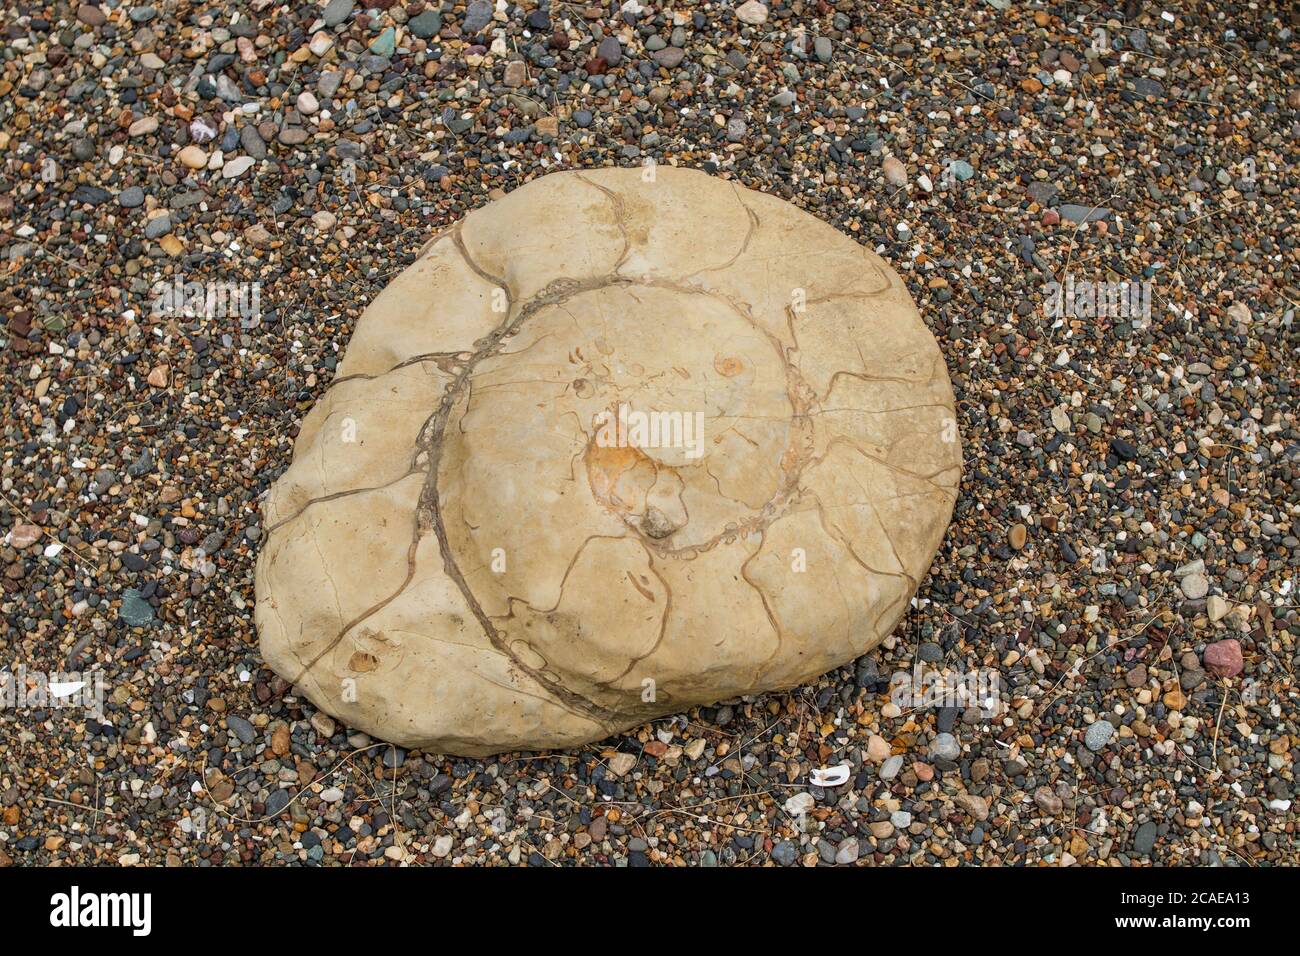 Ammonites are one of the ancient fossils. These are cephalopods that wore round shells. Stock Photo